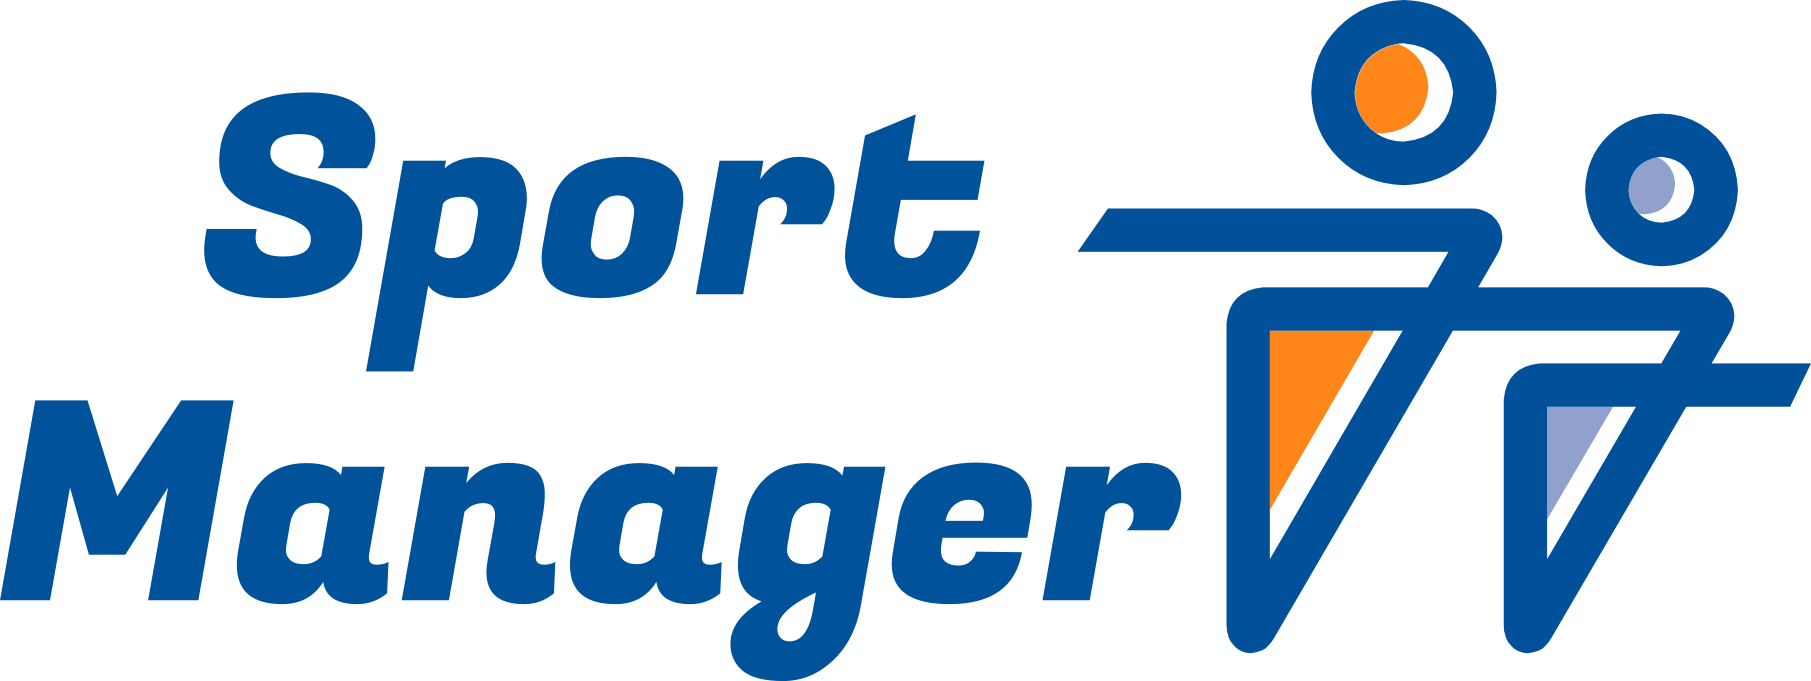 Sport Manager